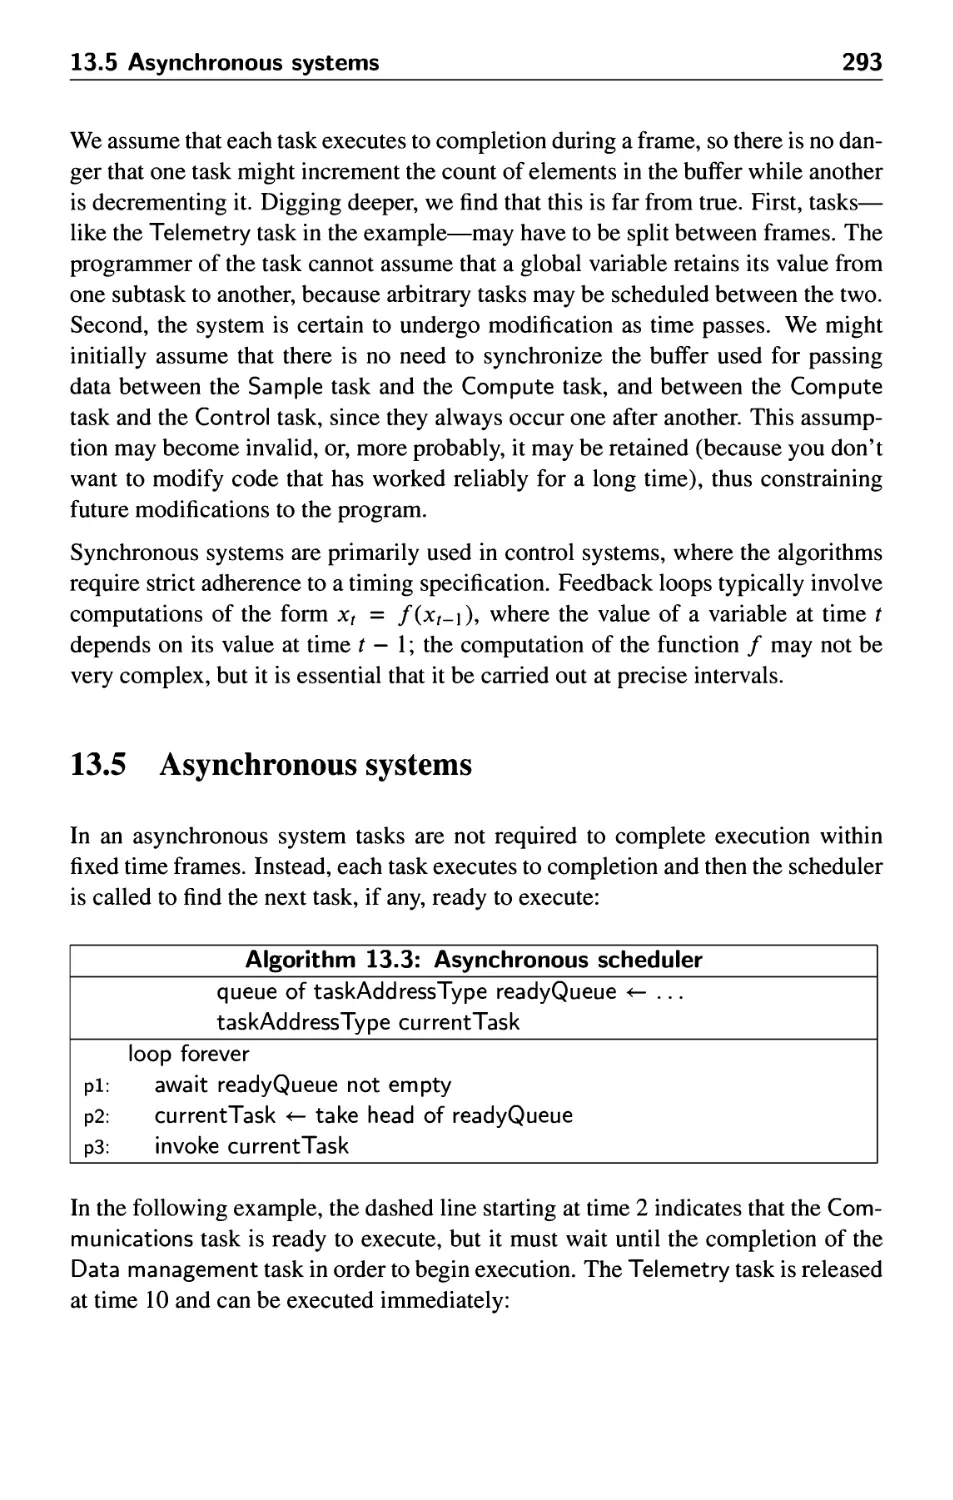 13.5 Asynchronous systems